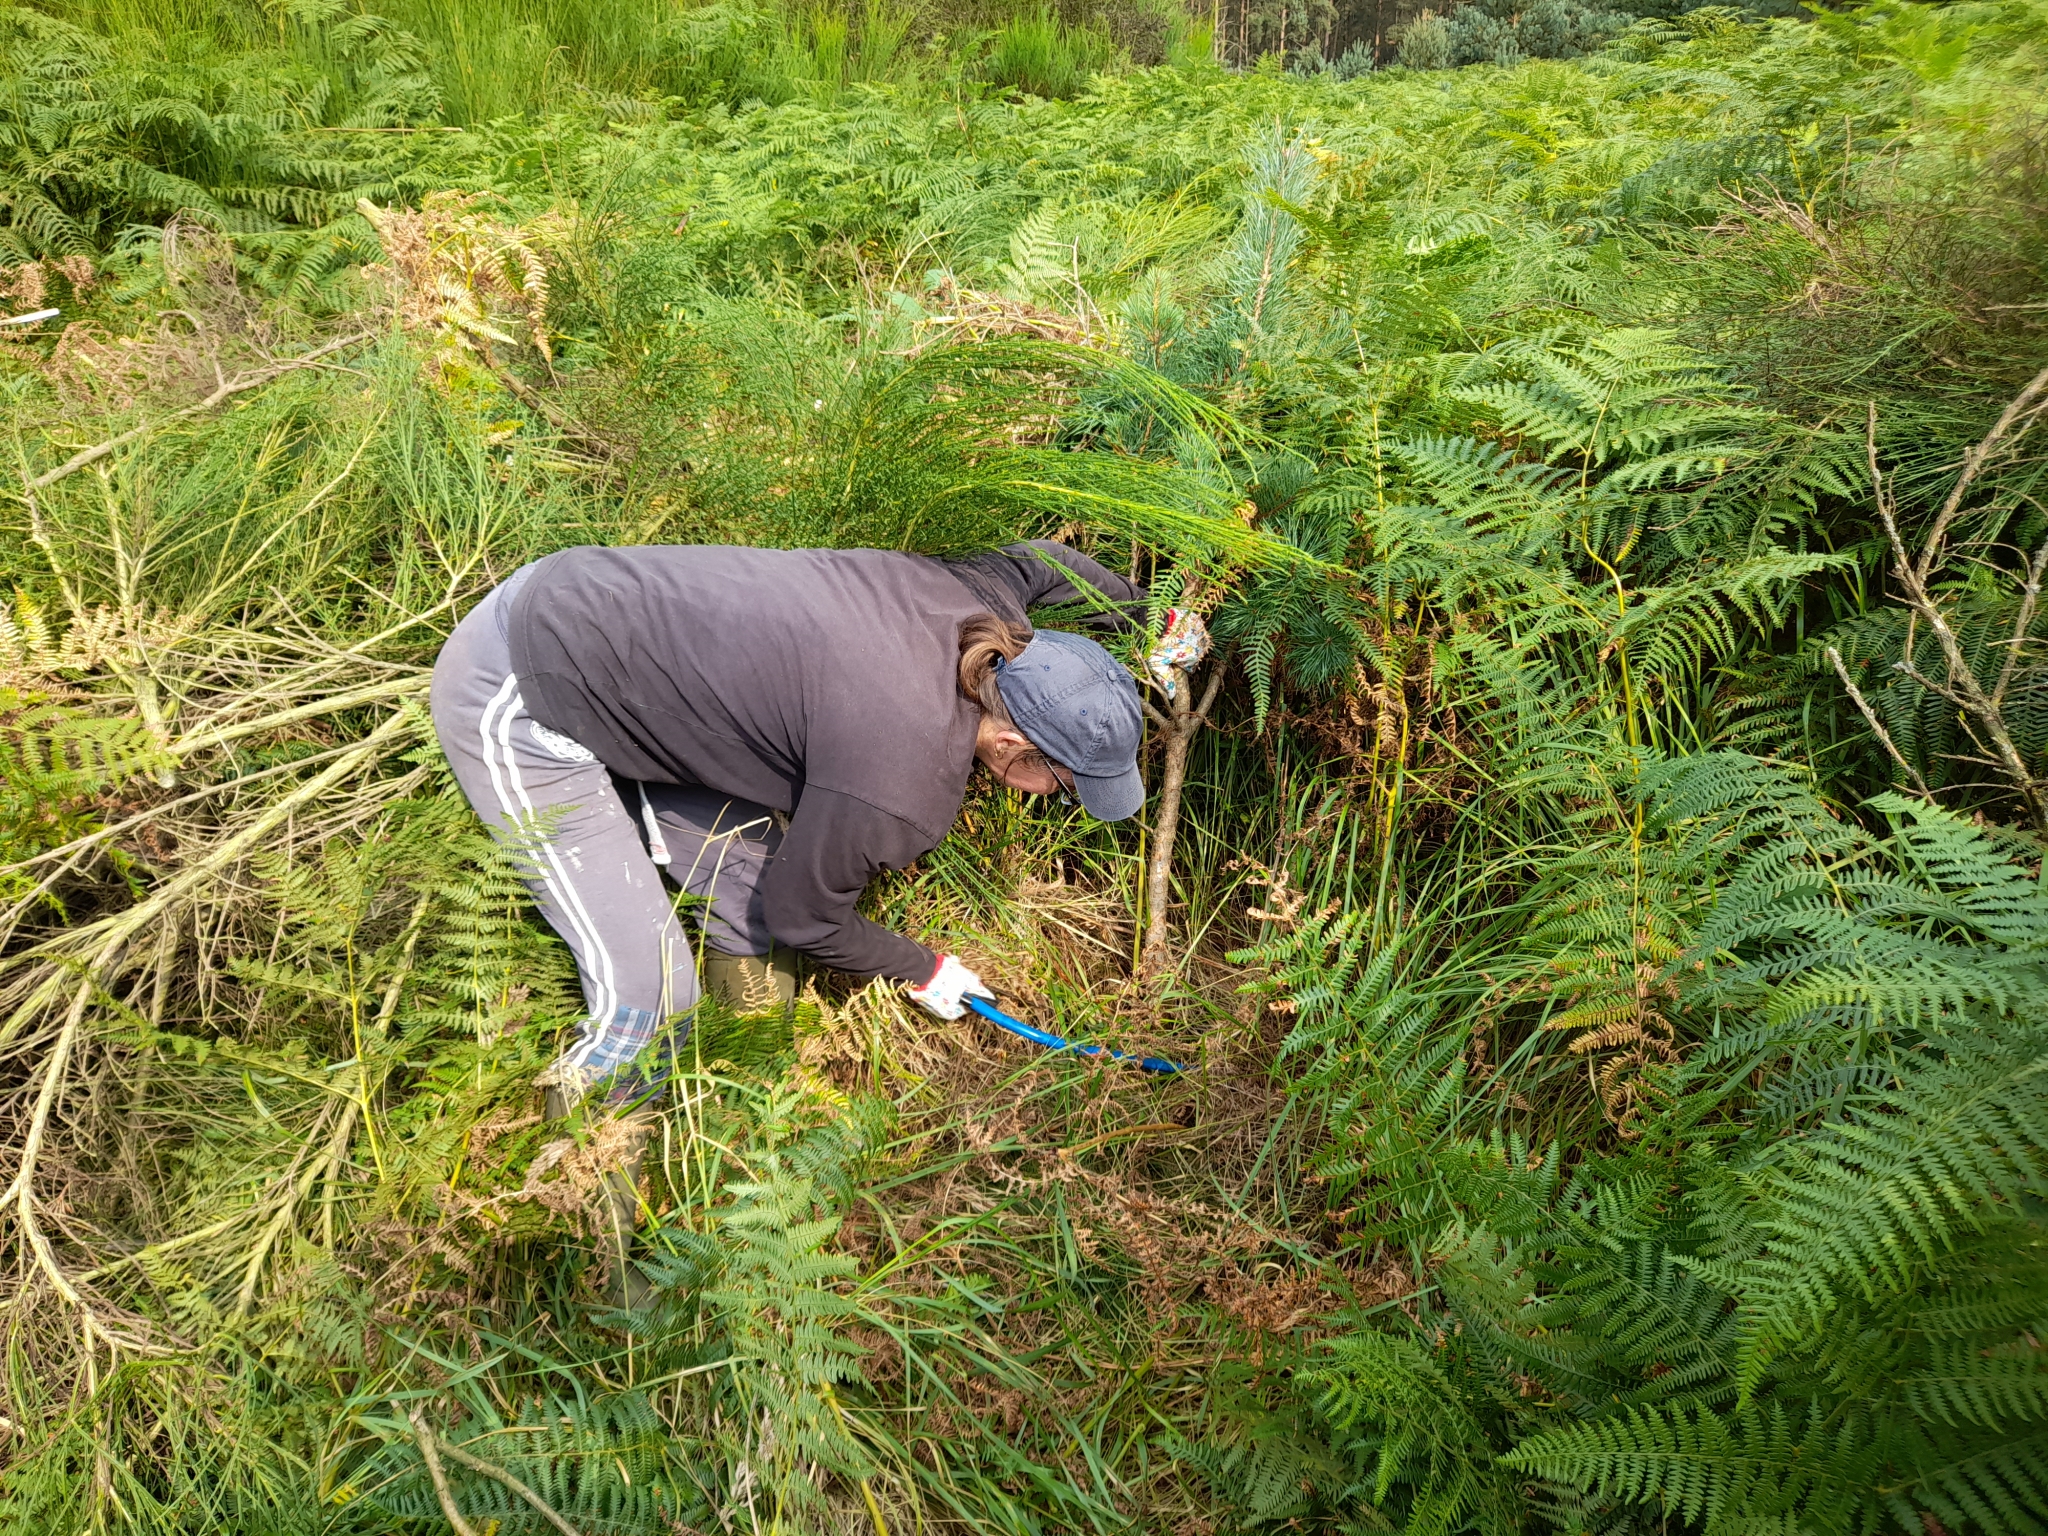 A photo from the FoTF Conservation Event - September 2021 - Brash Clearance at the Goshwak Trail : A volunteer bends down and uses a tool to cut some Bracken